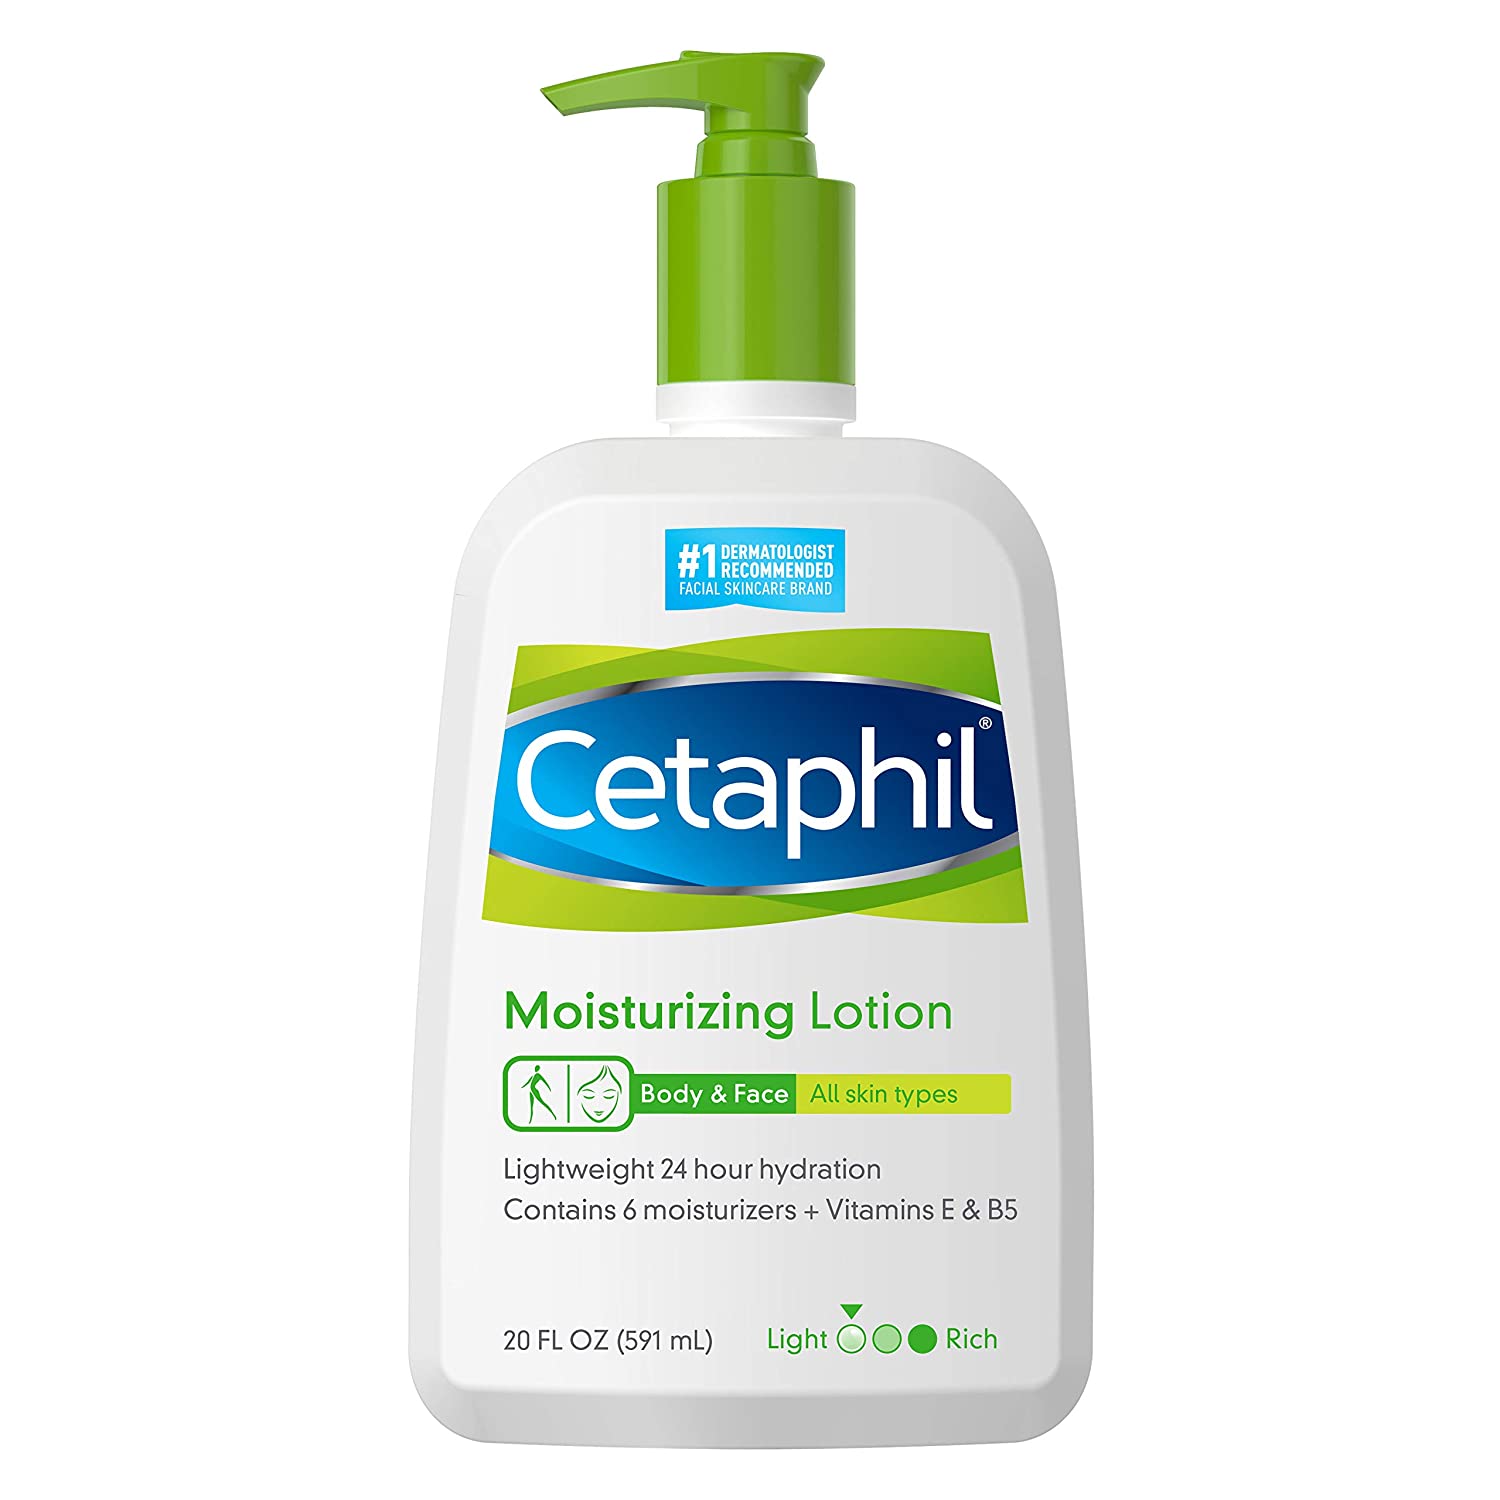 Cetaphil Moisturizing Lotion for All Skin Types, Fragrance-Free